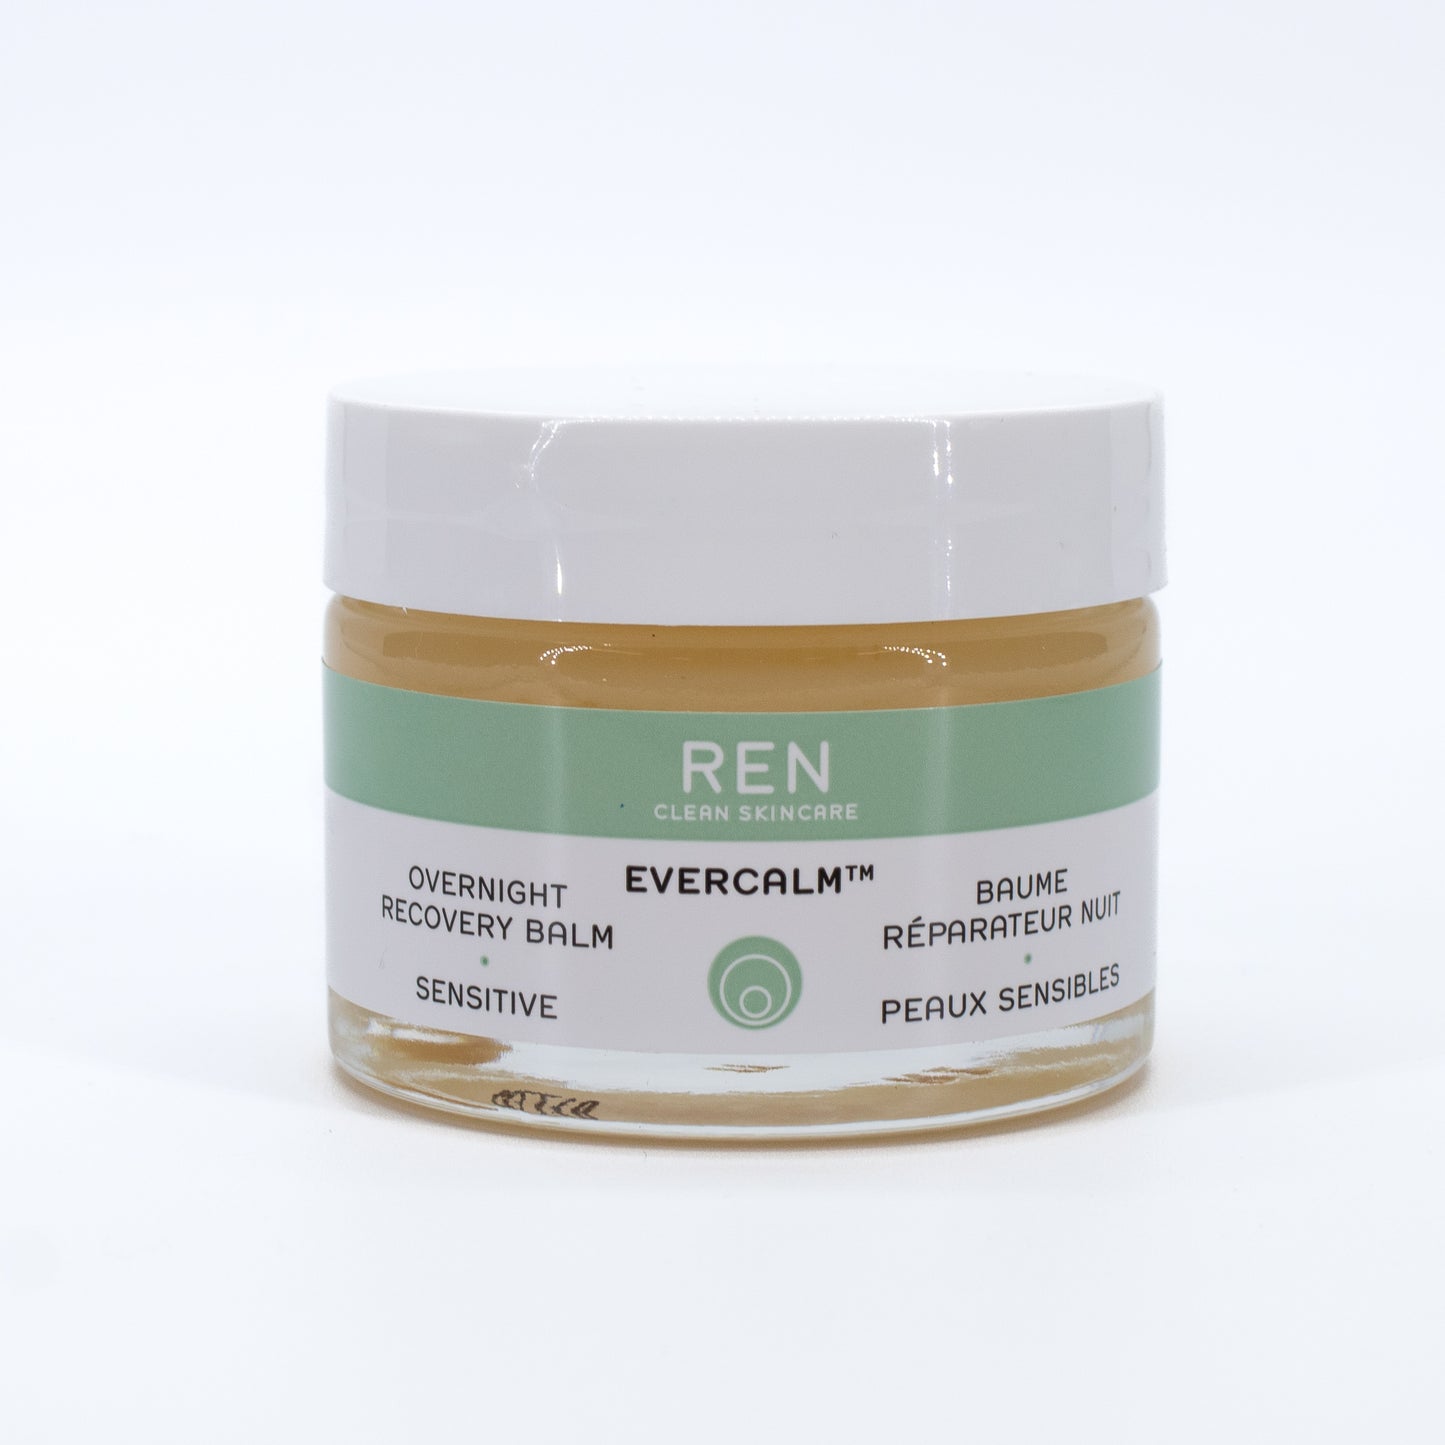 REN Overnight Recovery Balm Limited Edition 1.7 fl oz - Imperfect Box